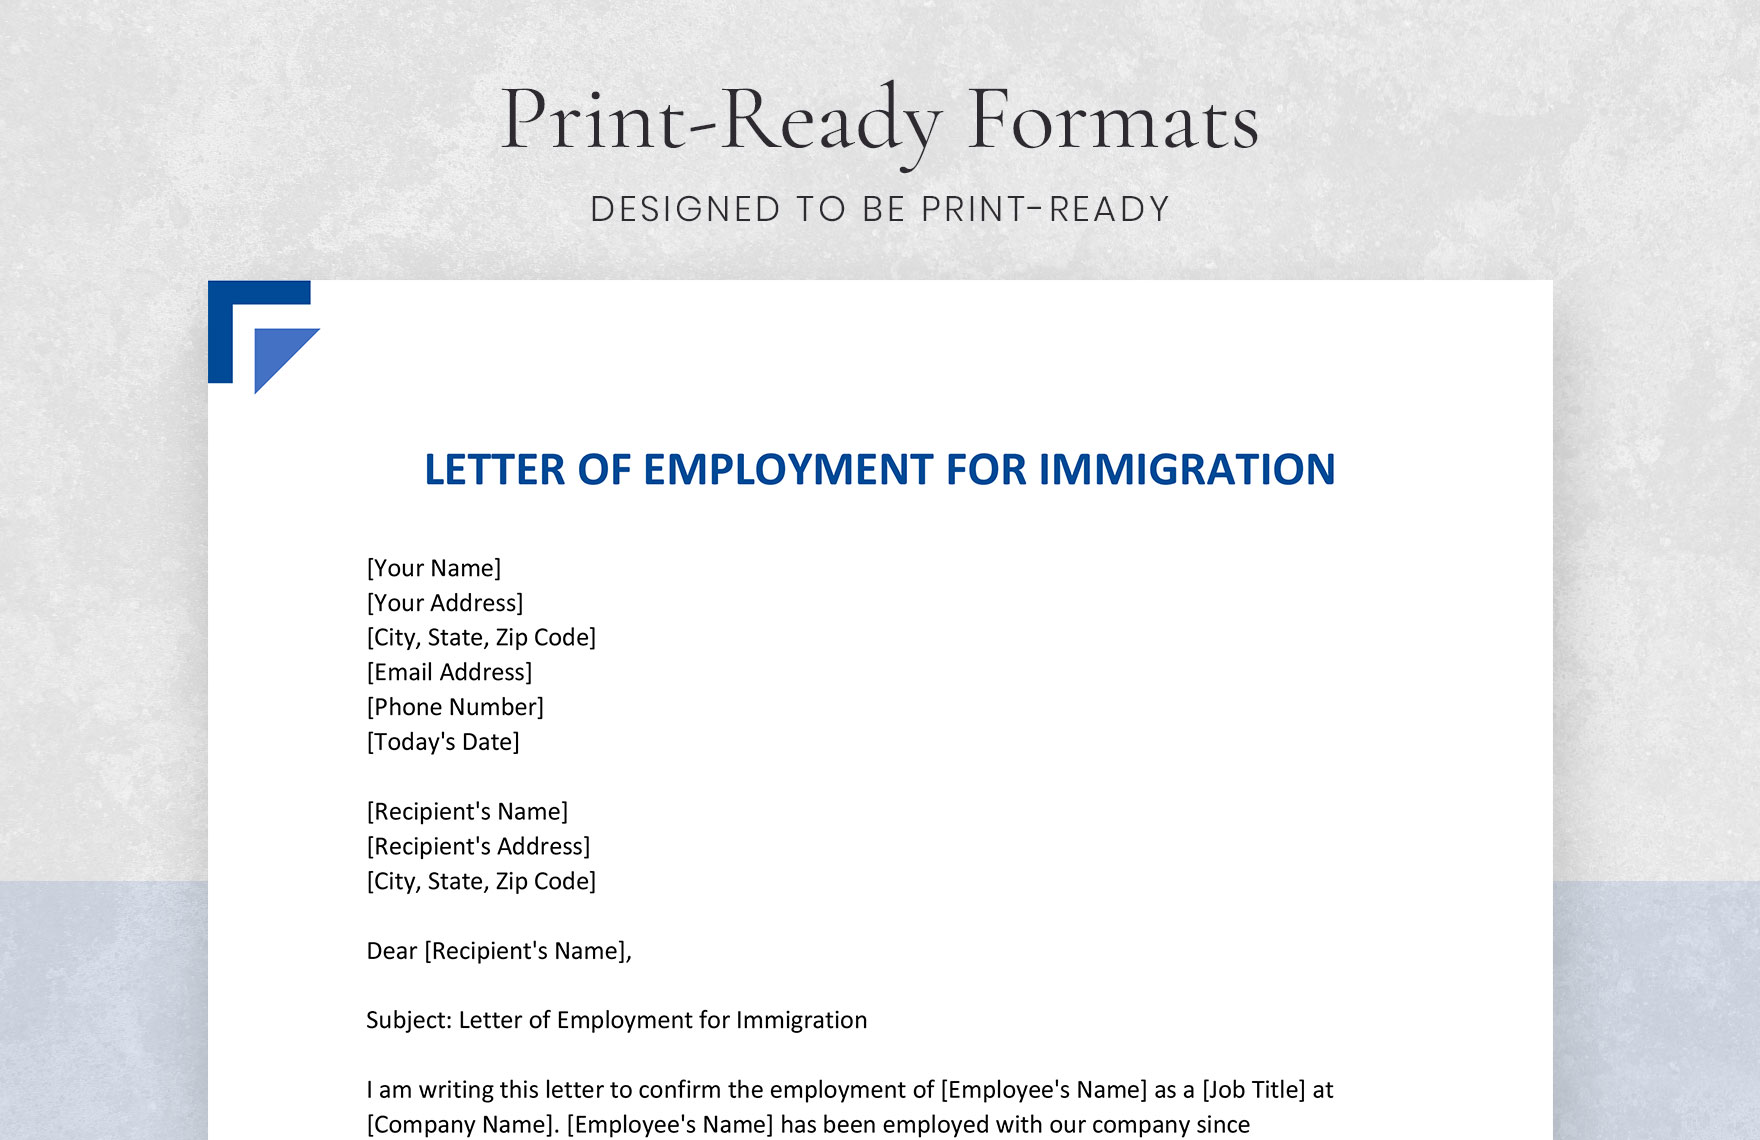 Letter of Employment for Immigration